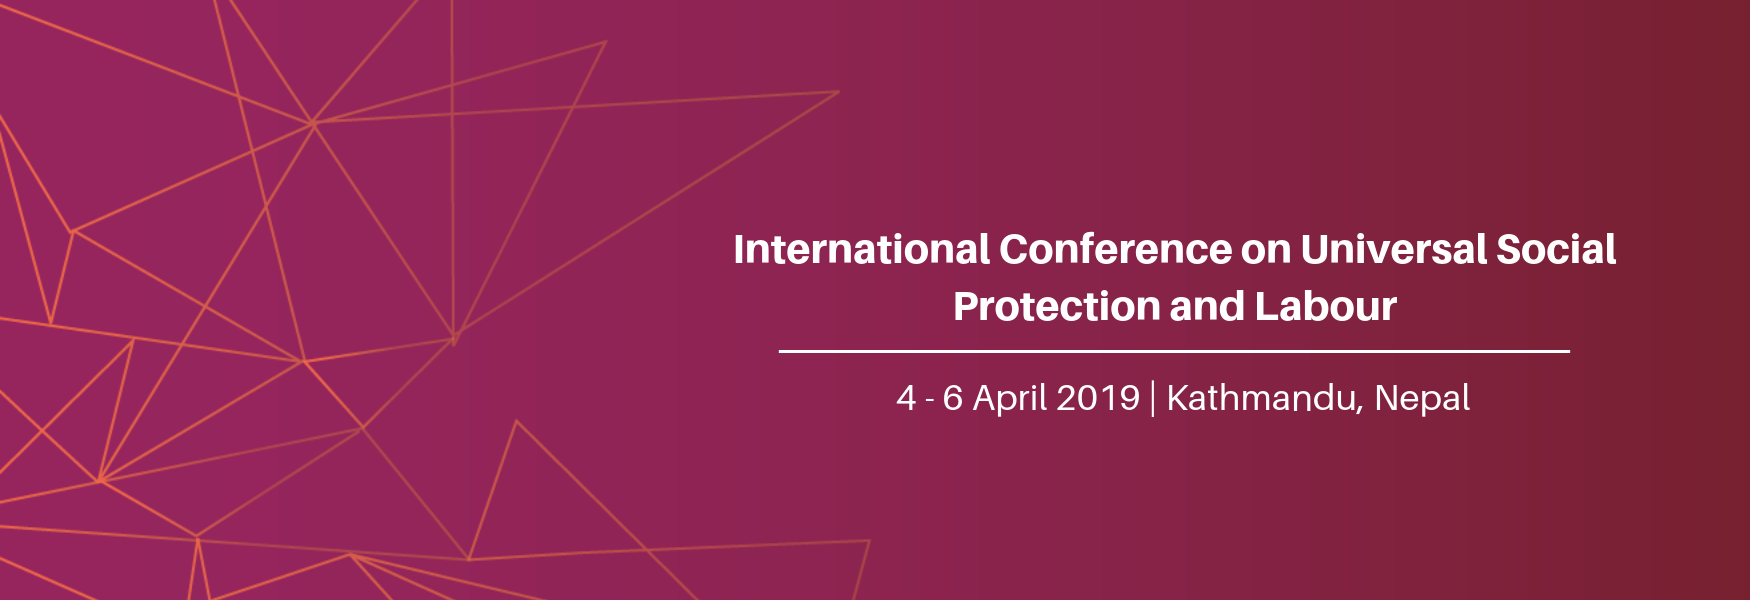 International Conference on Universal Social Protection and Labour IT